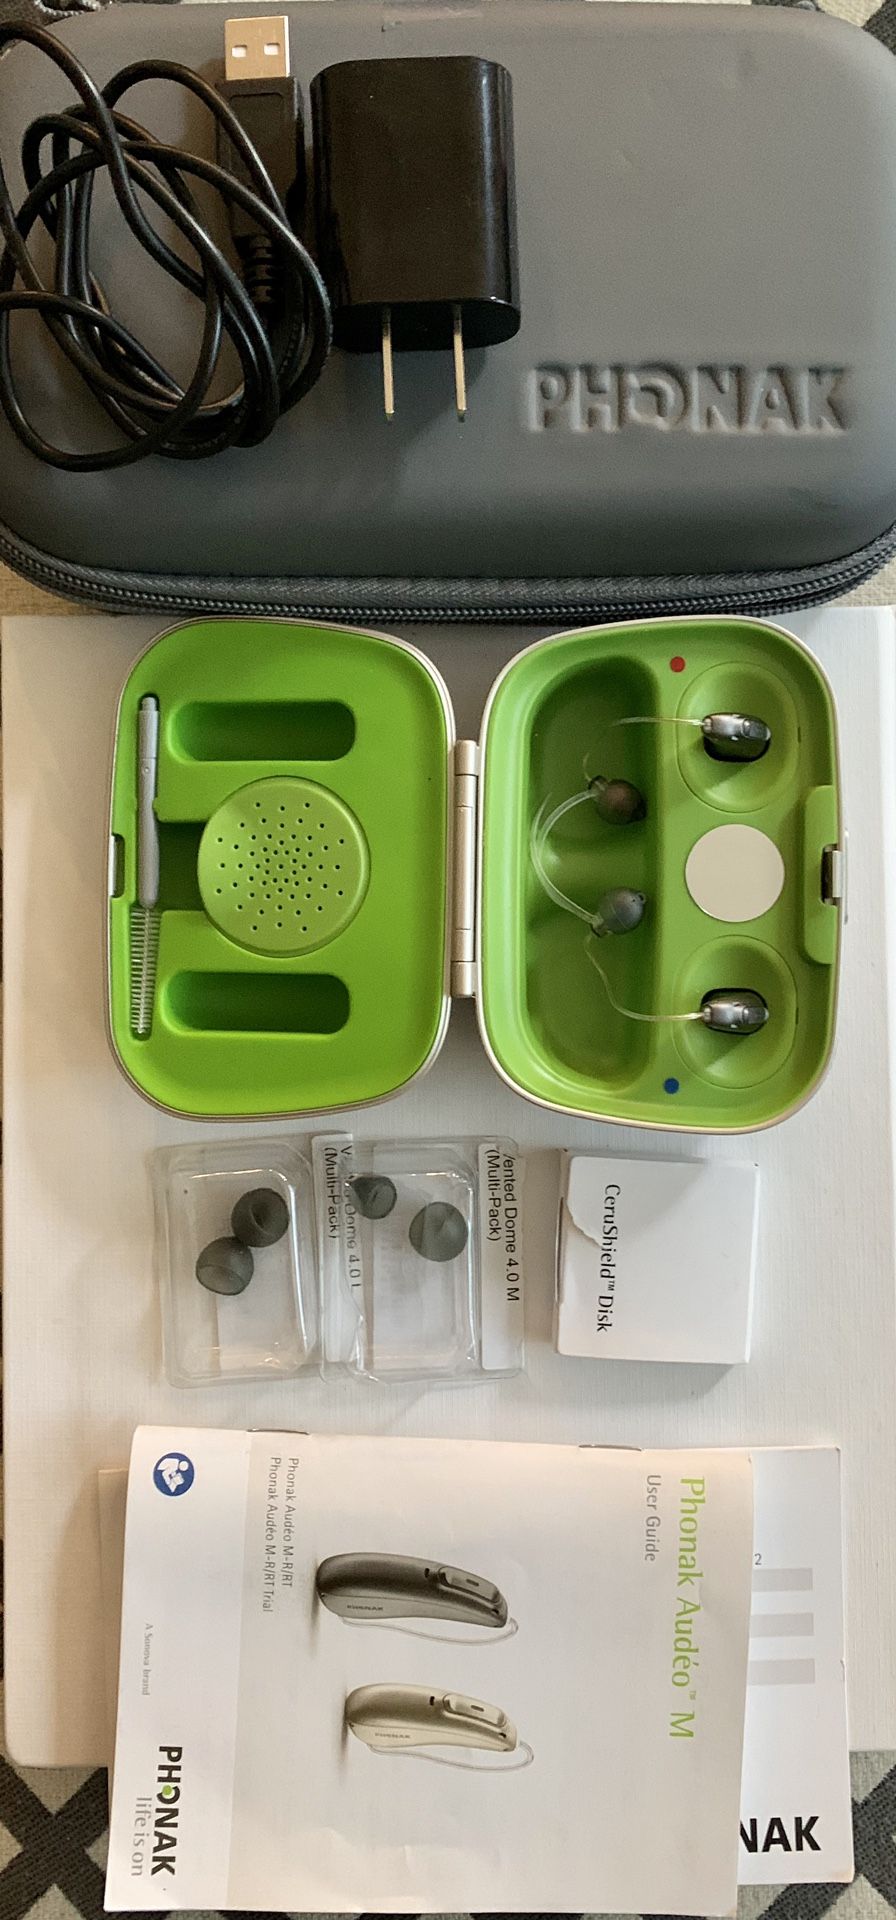 Phonak Audeo M90 RT hearing aid set of 2 with charging case